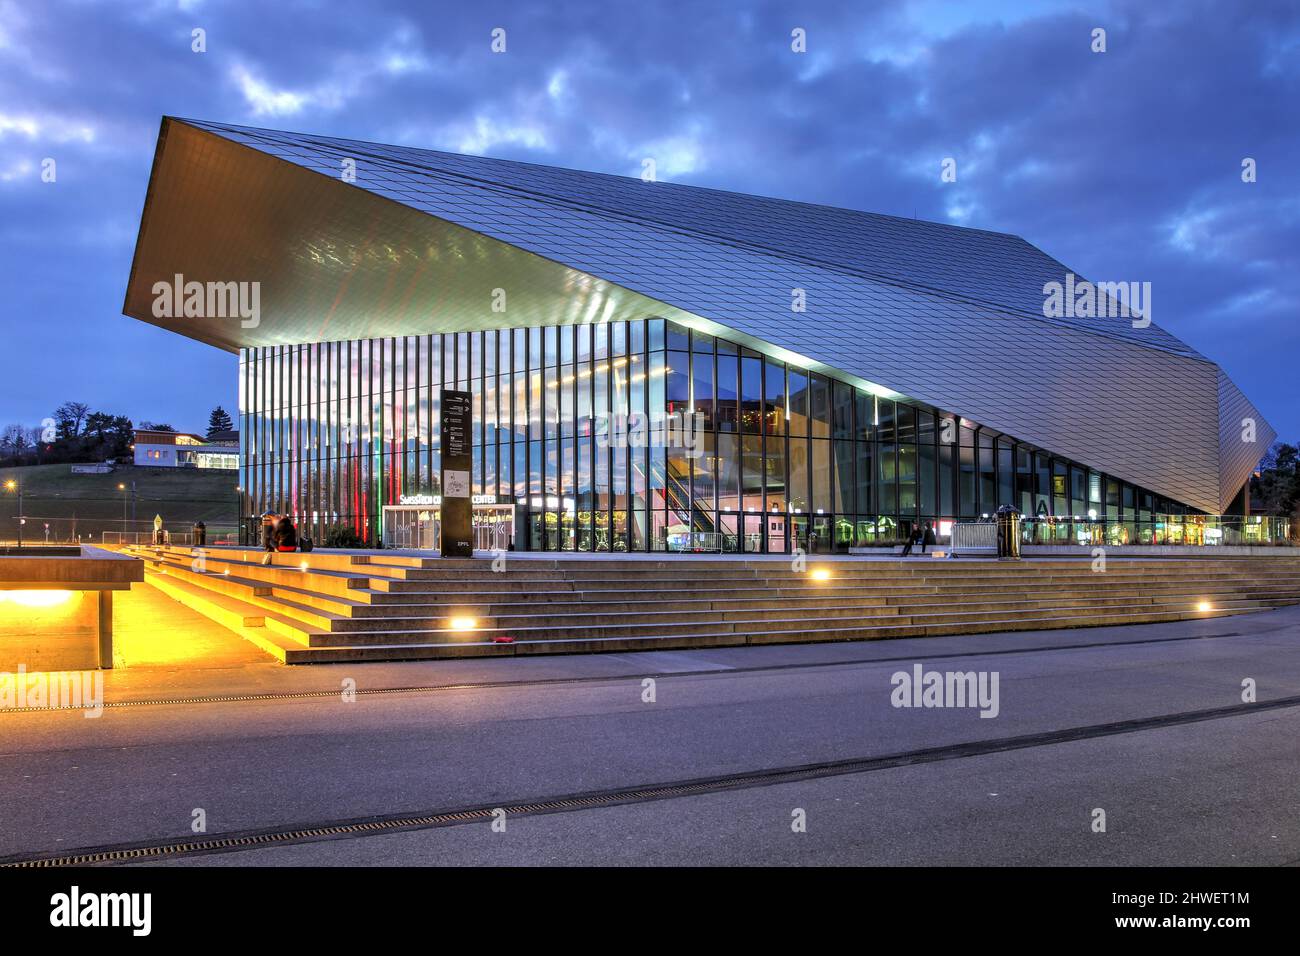 Lausanne, Switzerland - January 7, 2021 - Innaugurated in 2014, the SwissTech Convention Center of the Swiss Federal Institute of Technology Lausanne Stock Photo